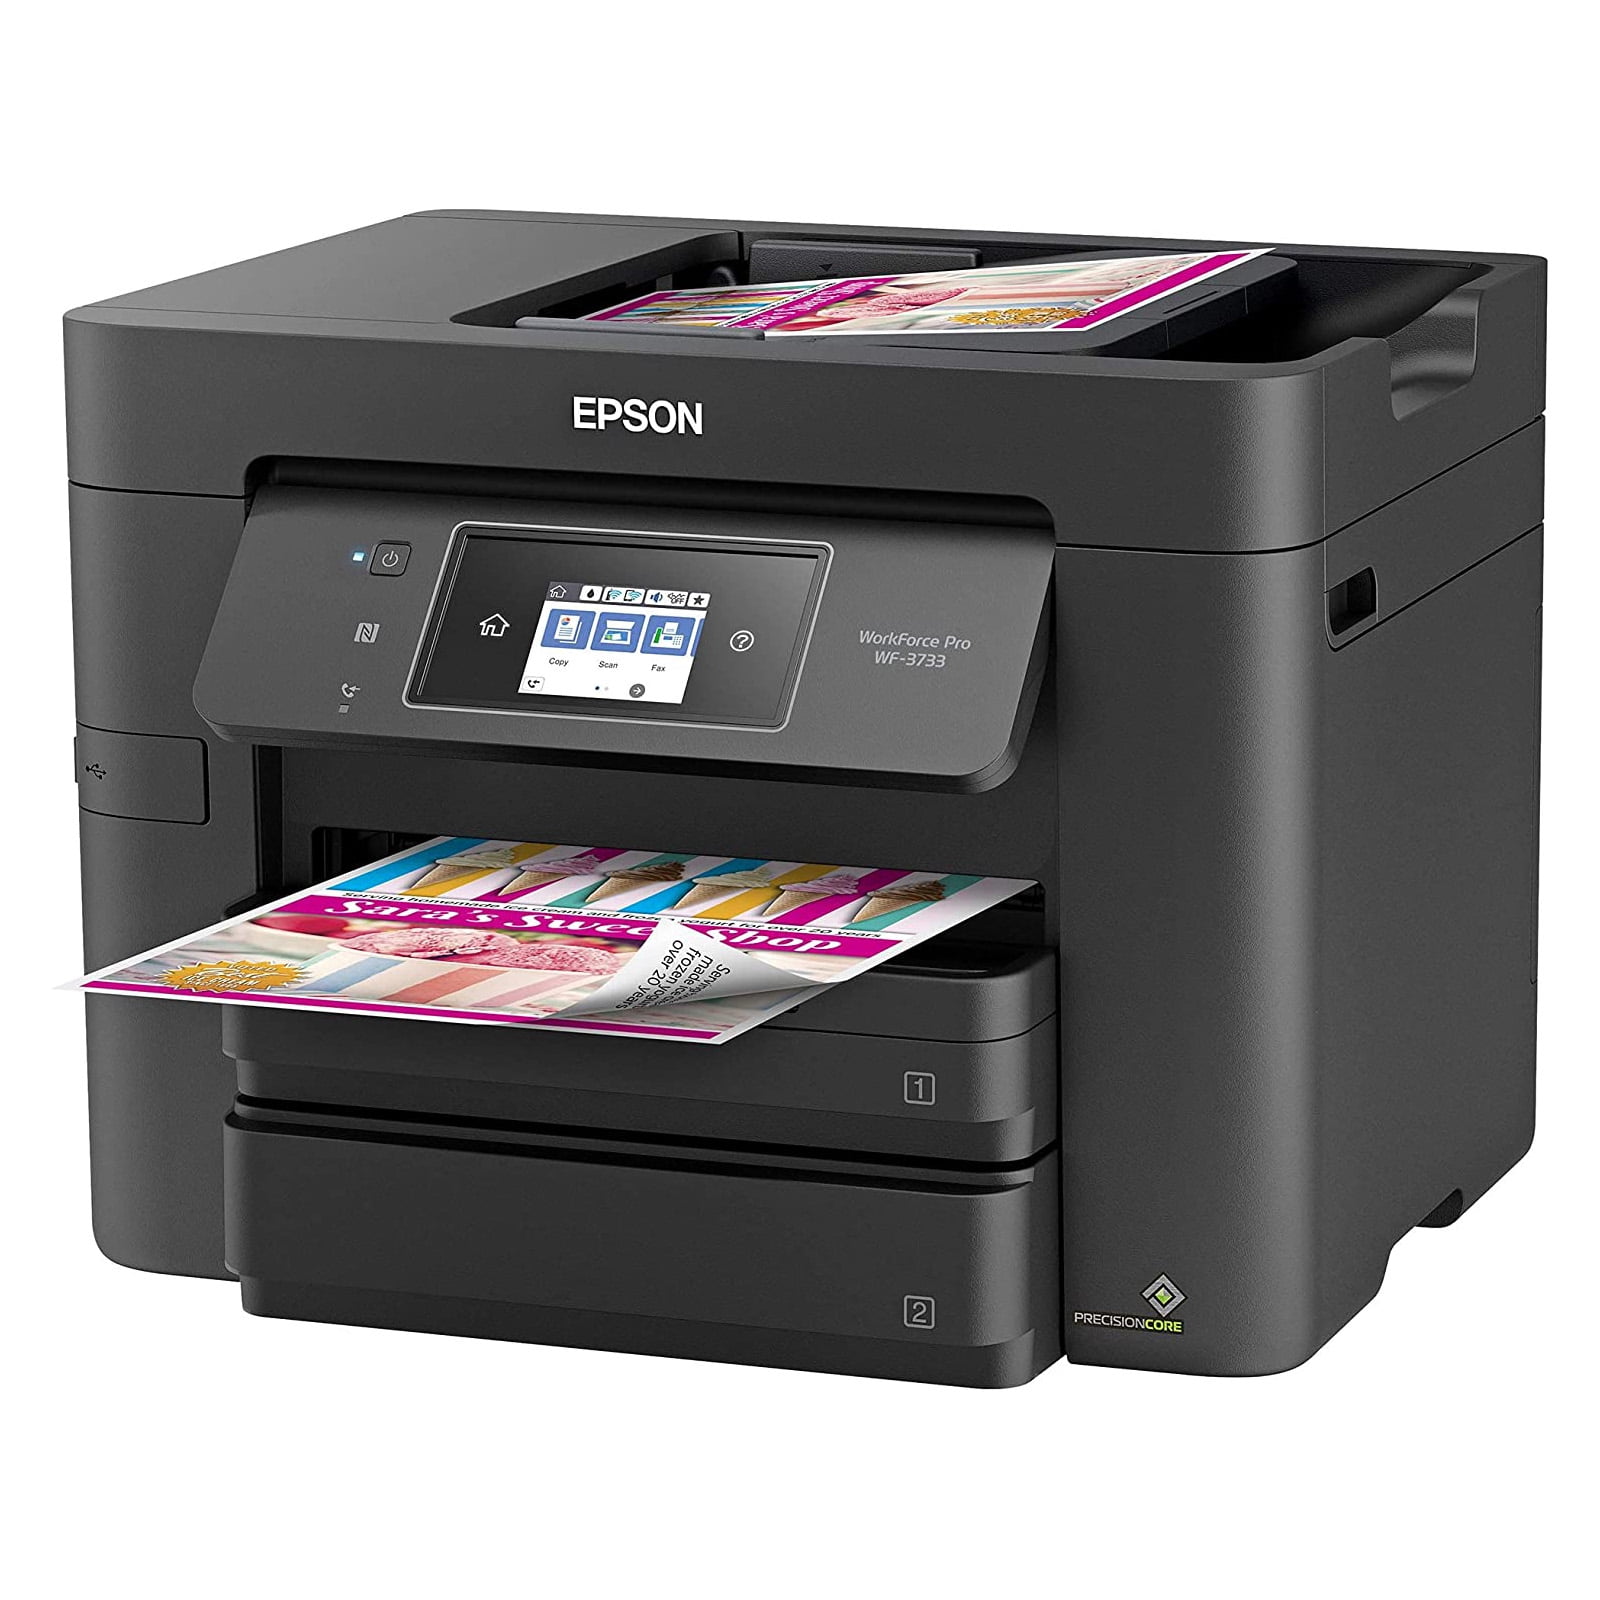 Epson Workforce Pro Wf 3733 Wireless All In One Color Inkjet Printer Home Office Printer 7026